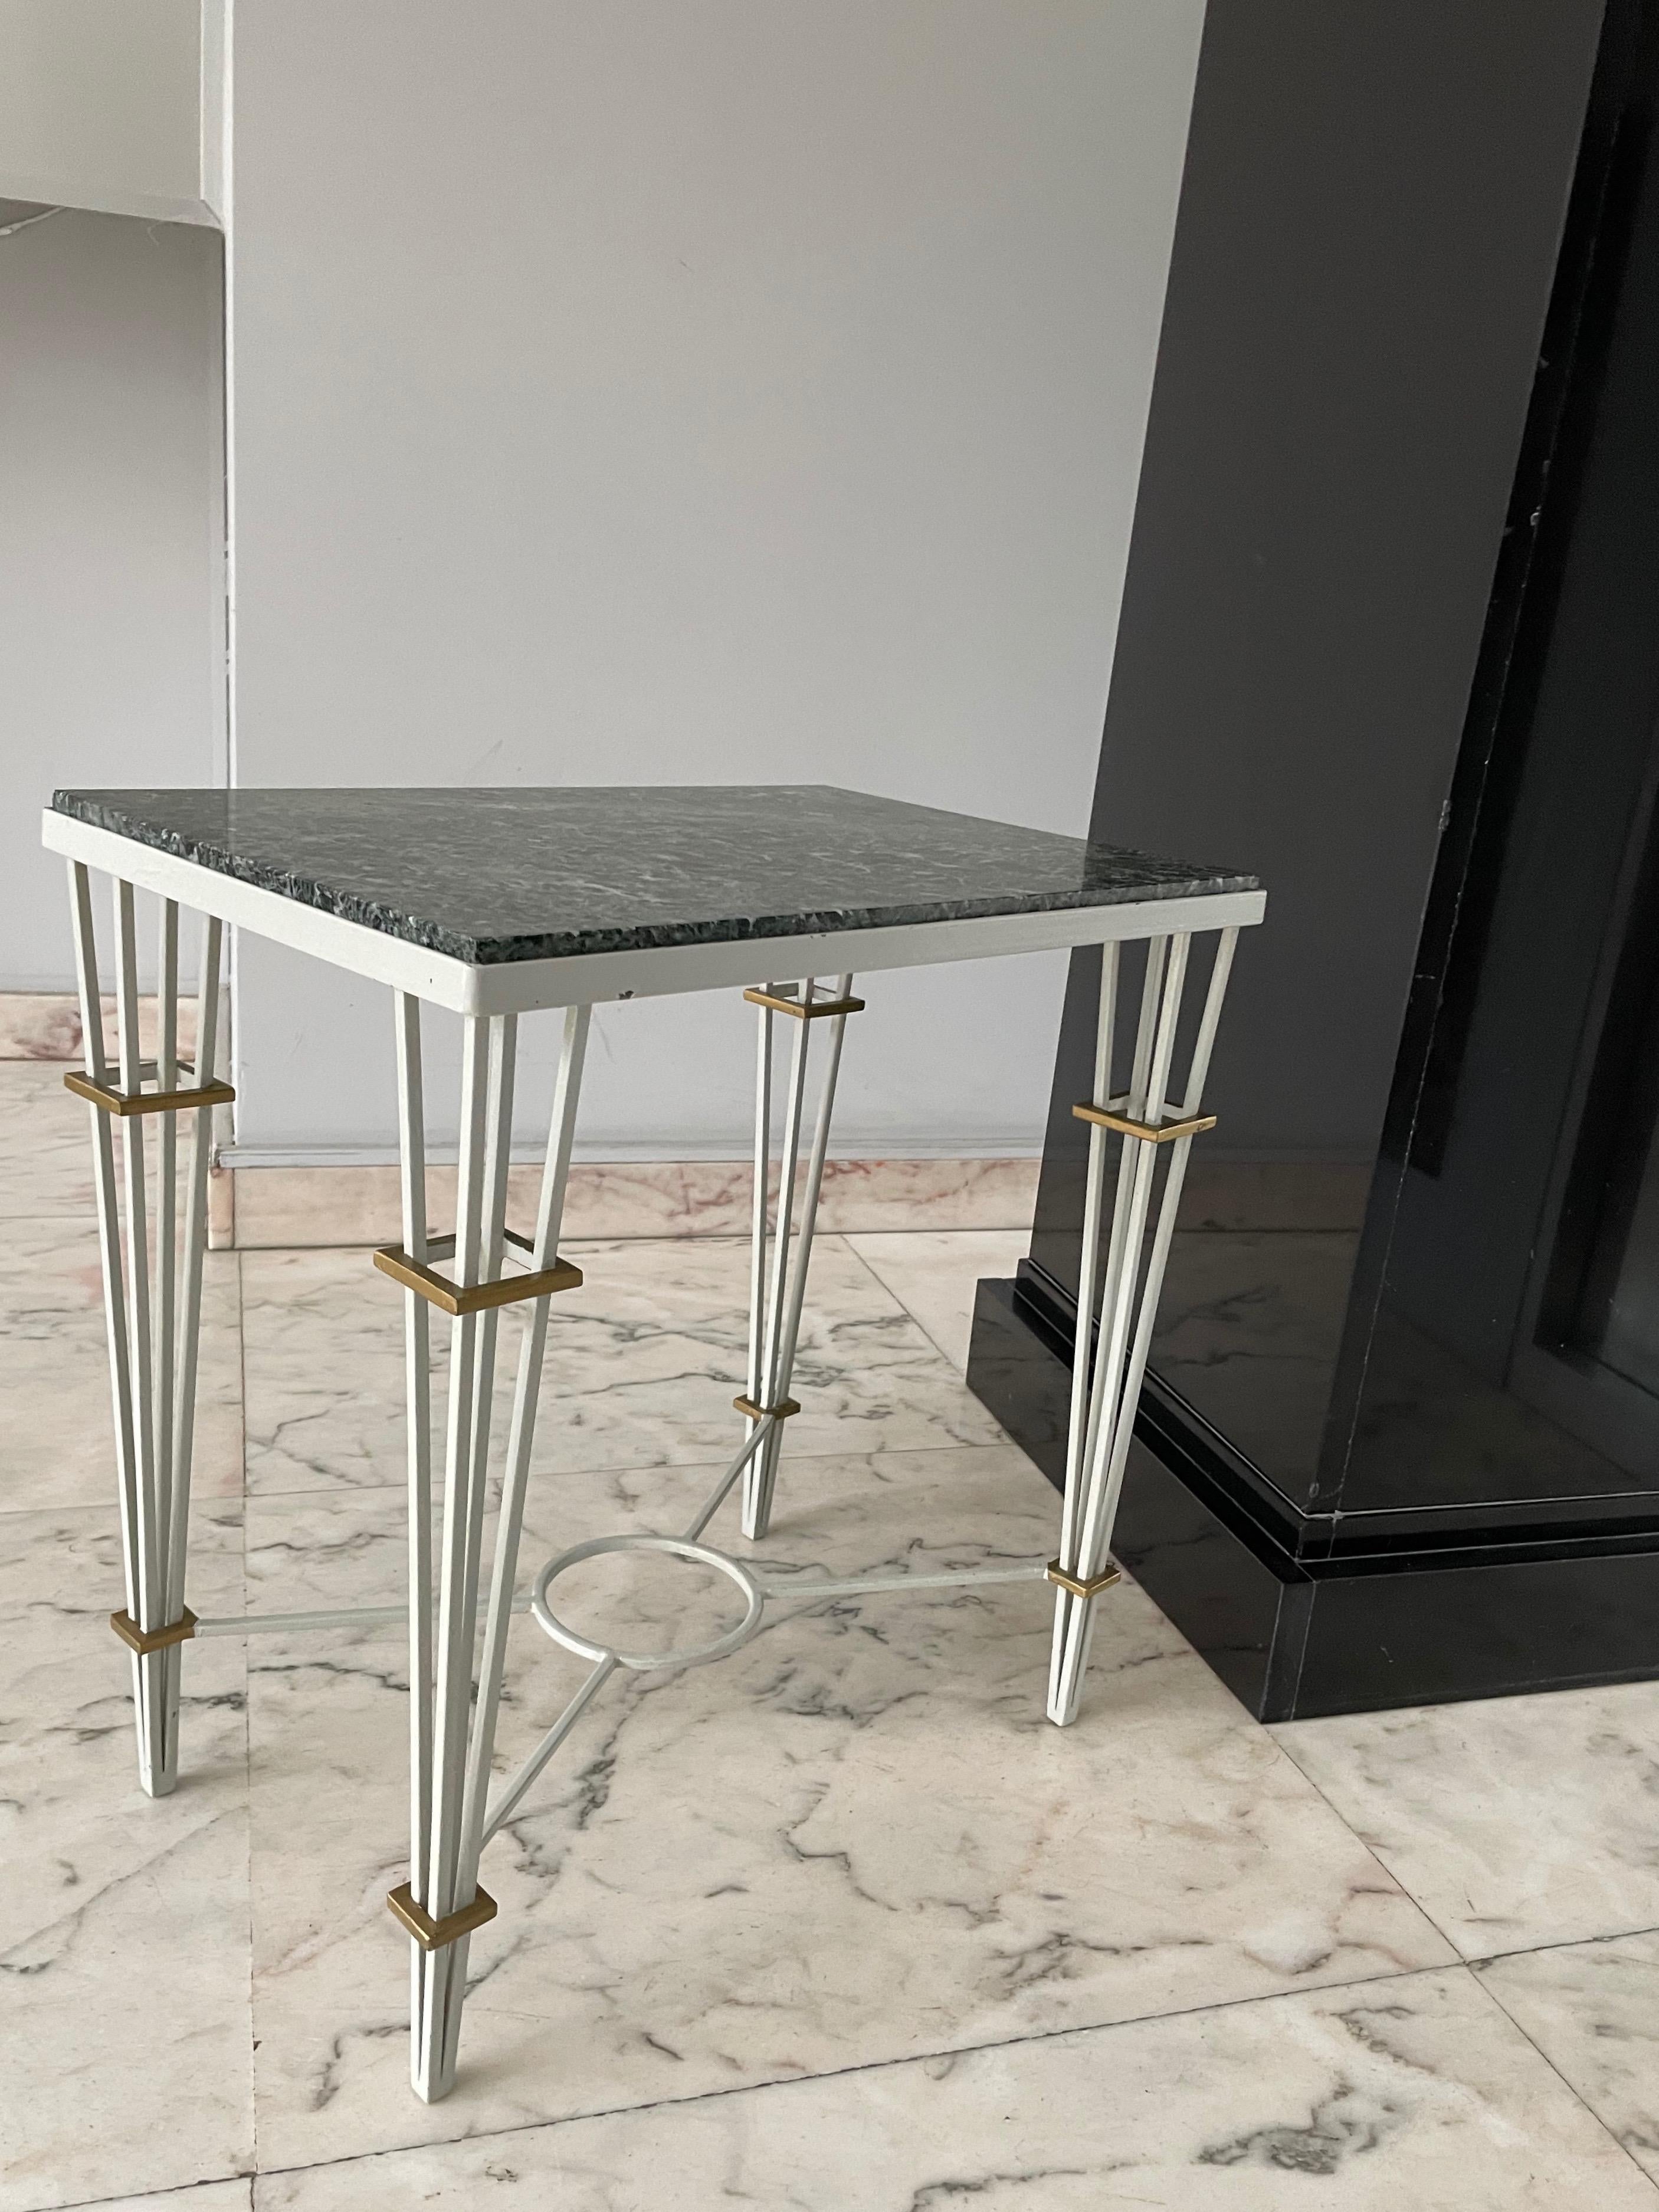 Mid-20th Century Petite Neoclassical White Lacquer Side Table by Jacques Adnet, France 1948. For Sale